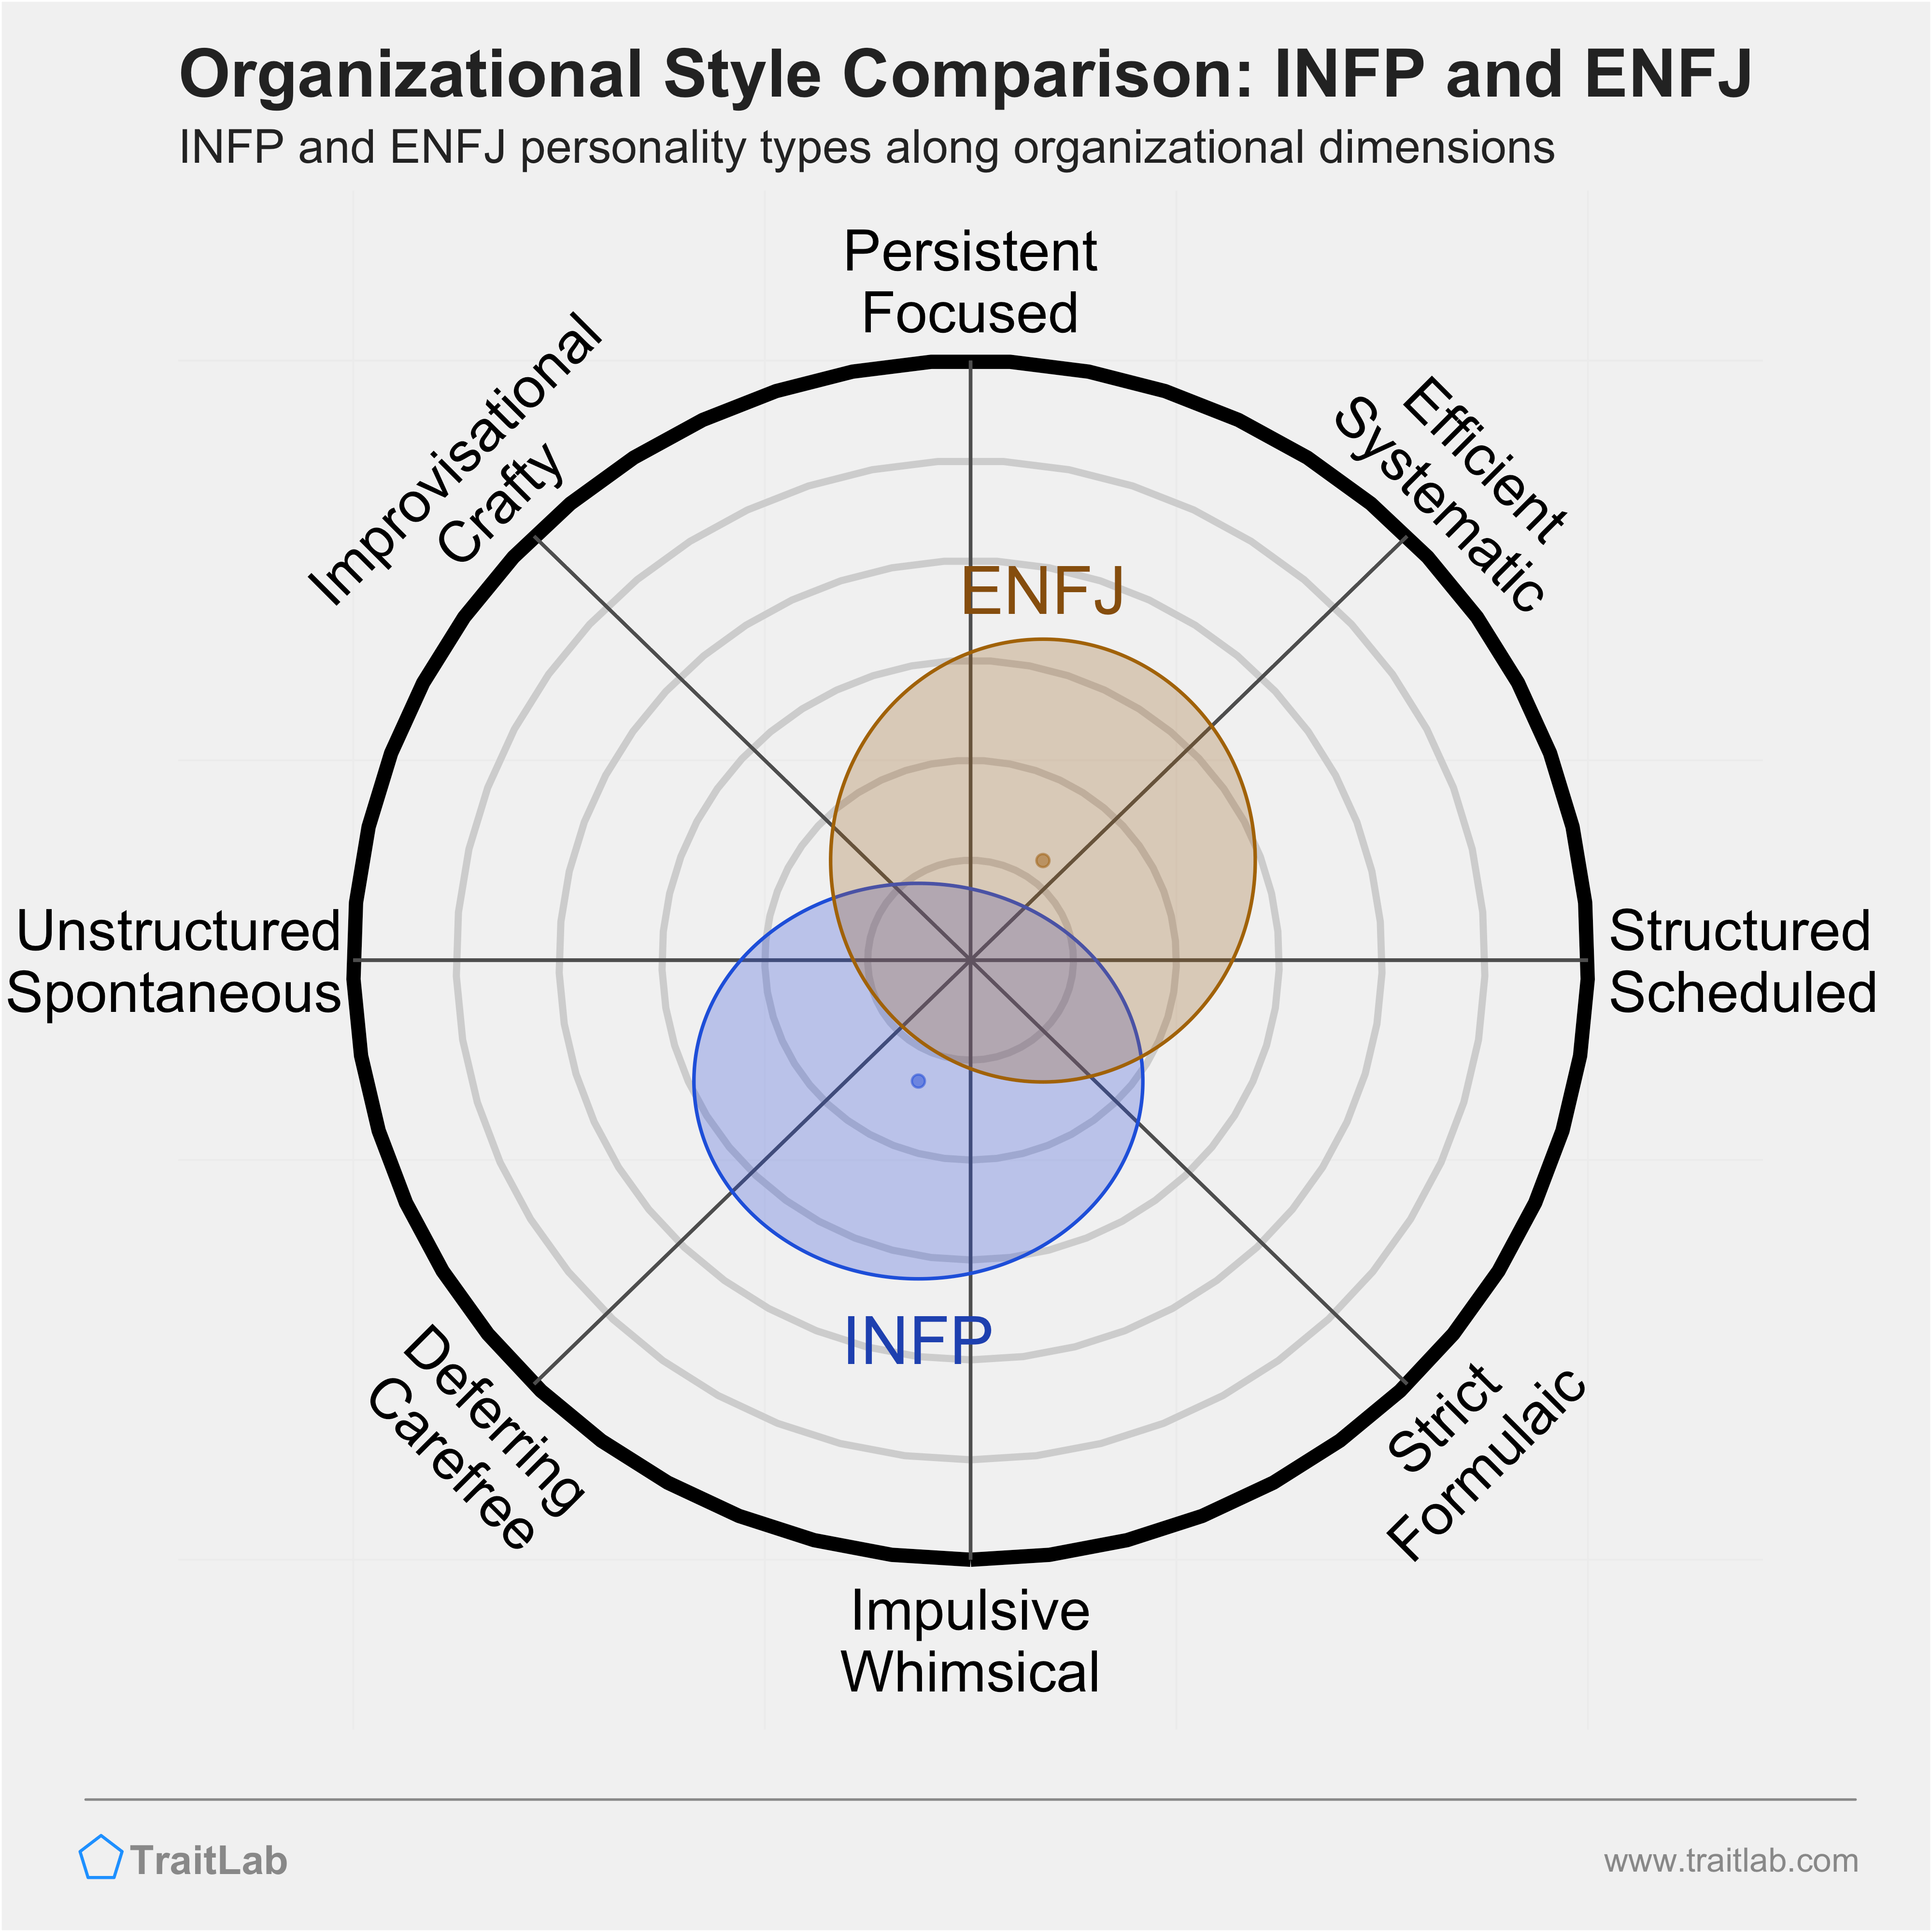 INFP and ENFJ comparison across organizational dimensions